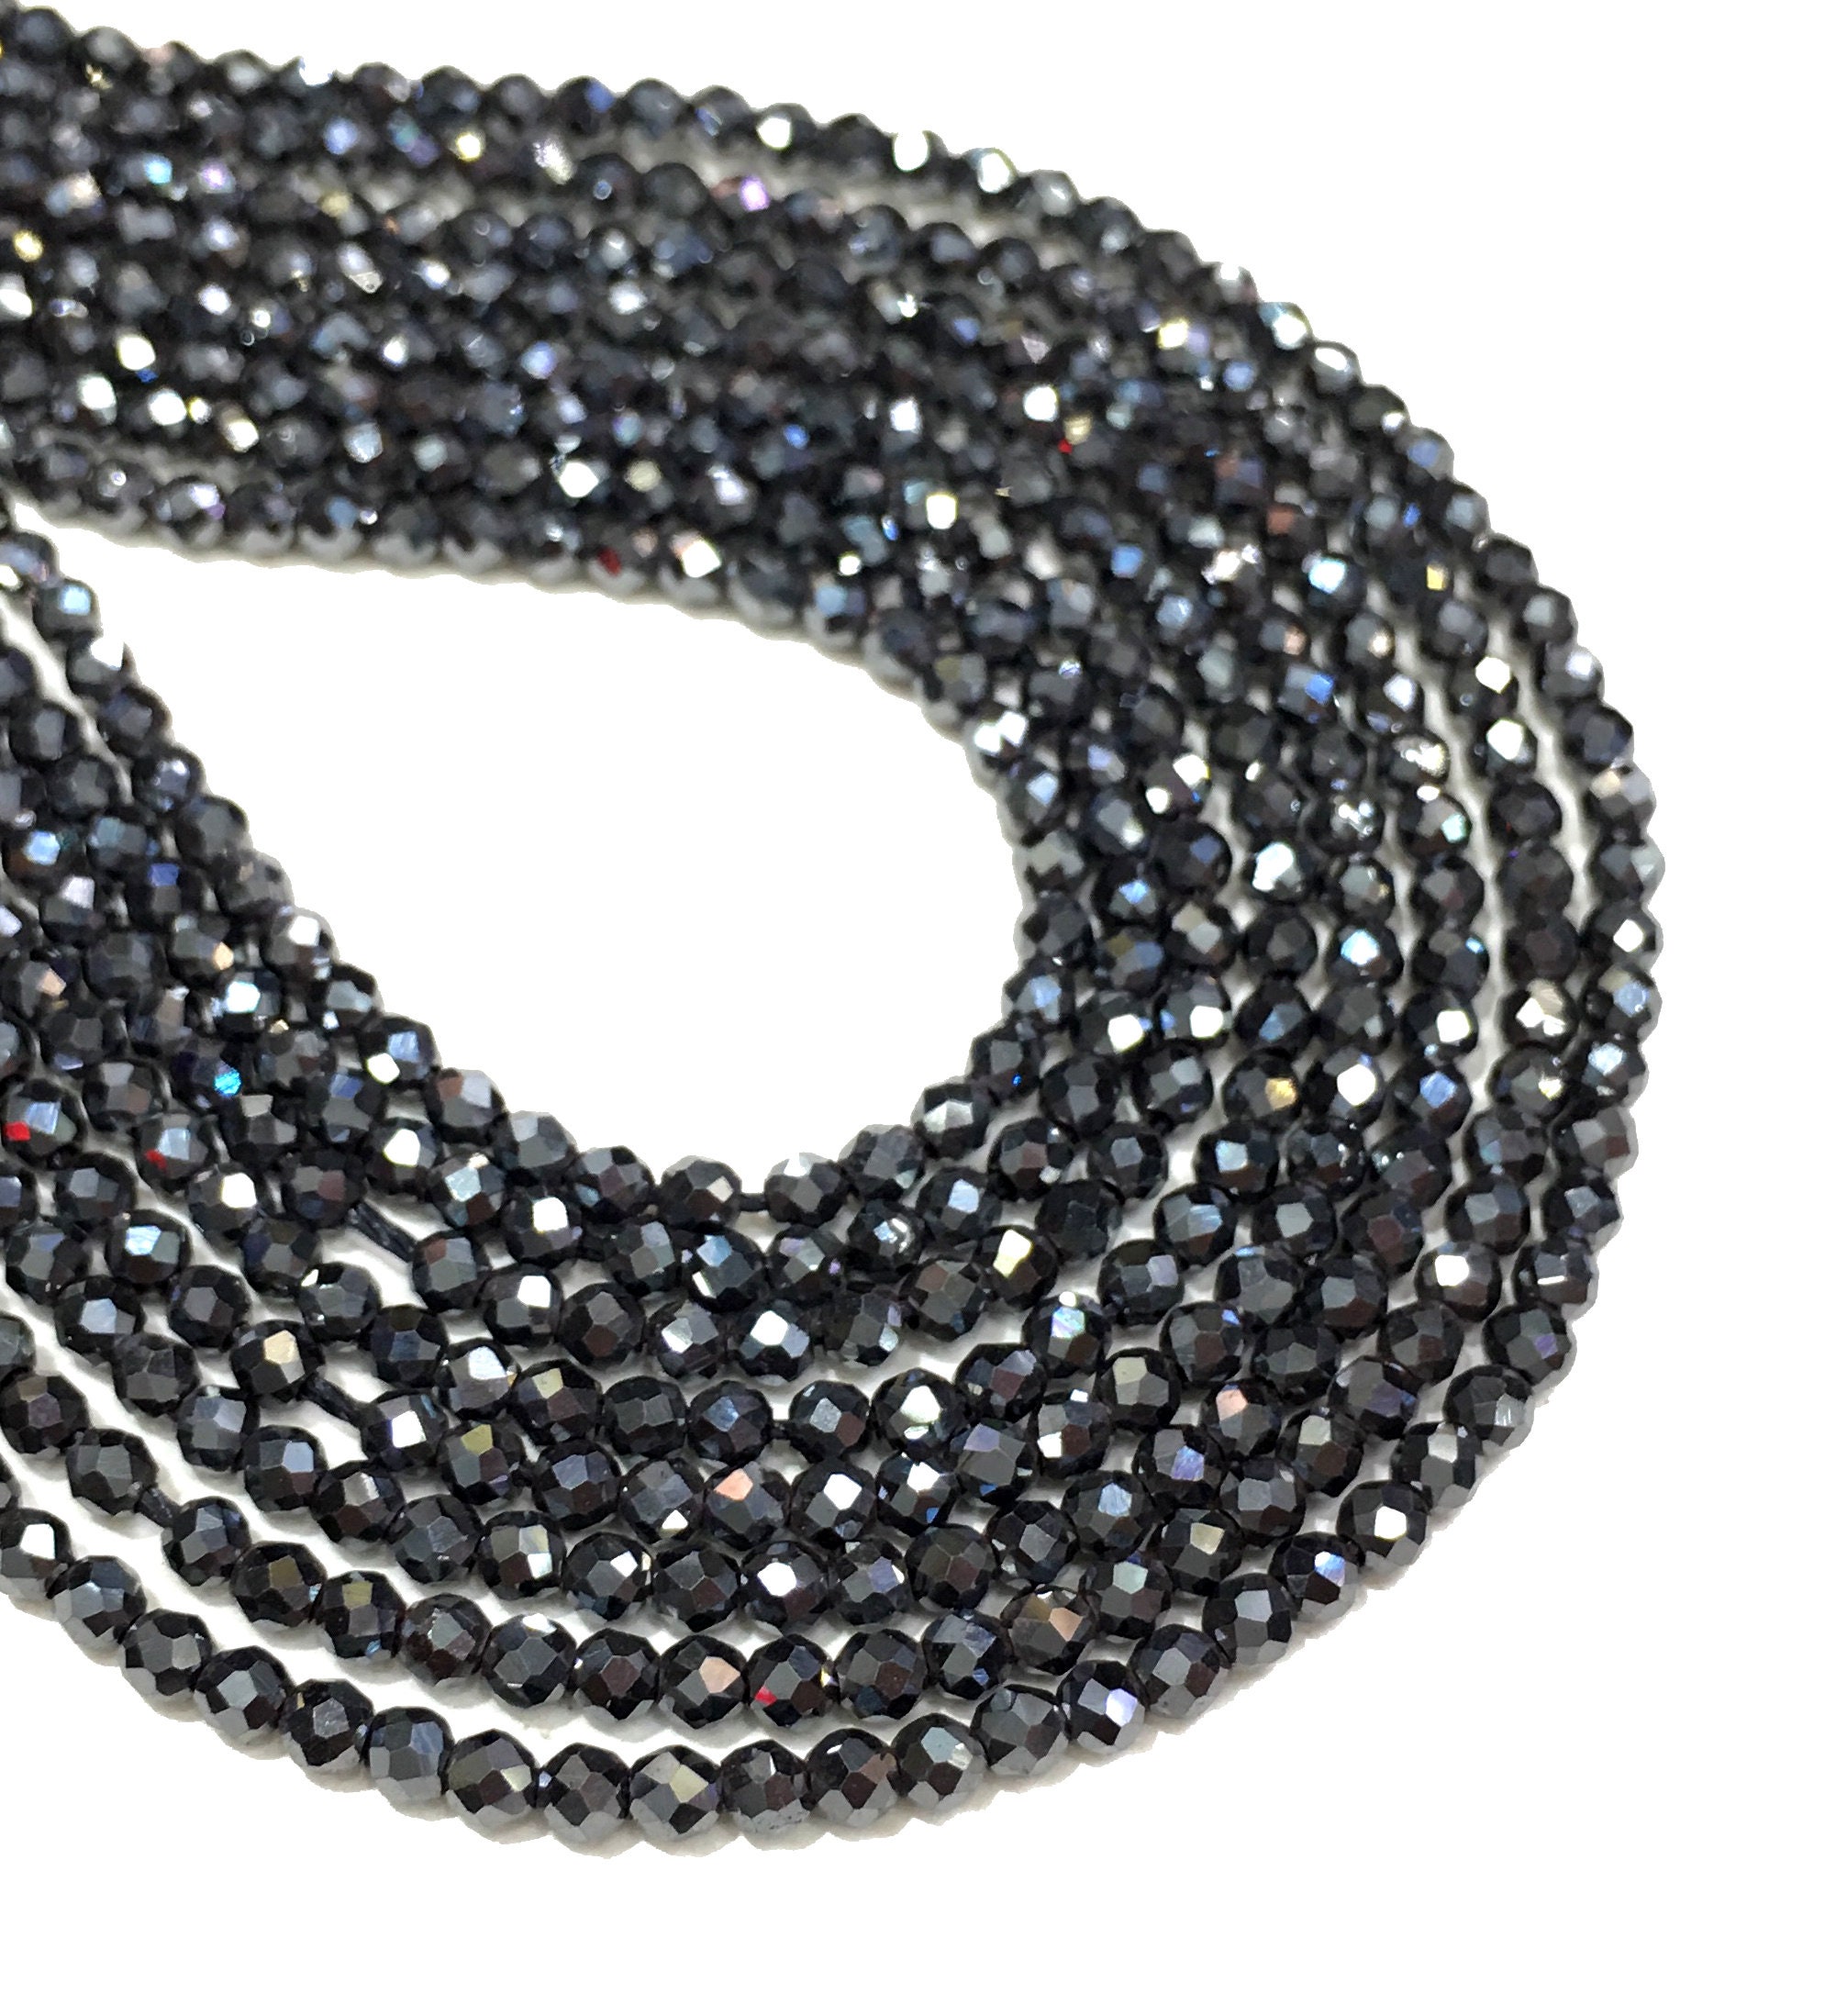  GEM-Inside 14mm Natural Black Hematite NonMagnetic Gemstone  Loose Beads Round Energy Stone Power Beads for Jewelry Making 15